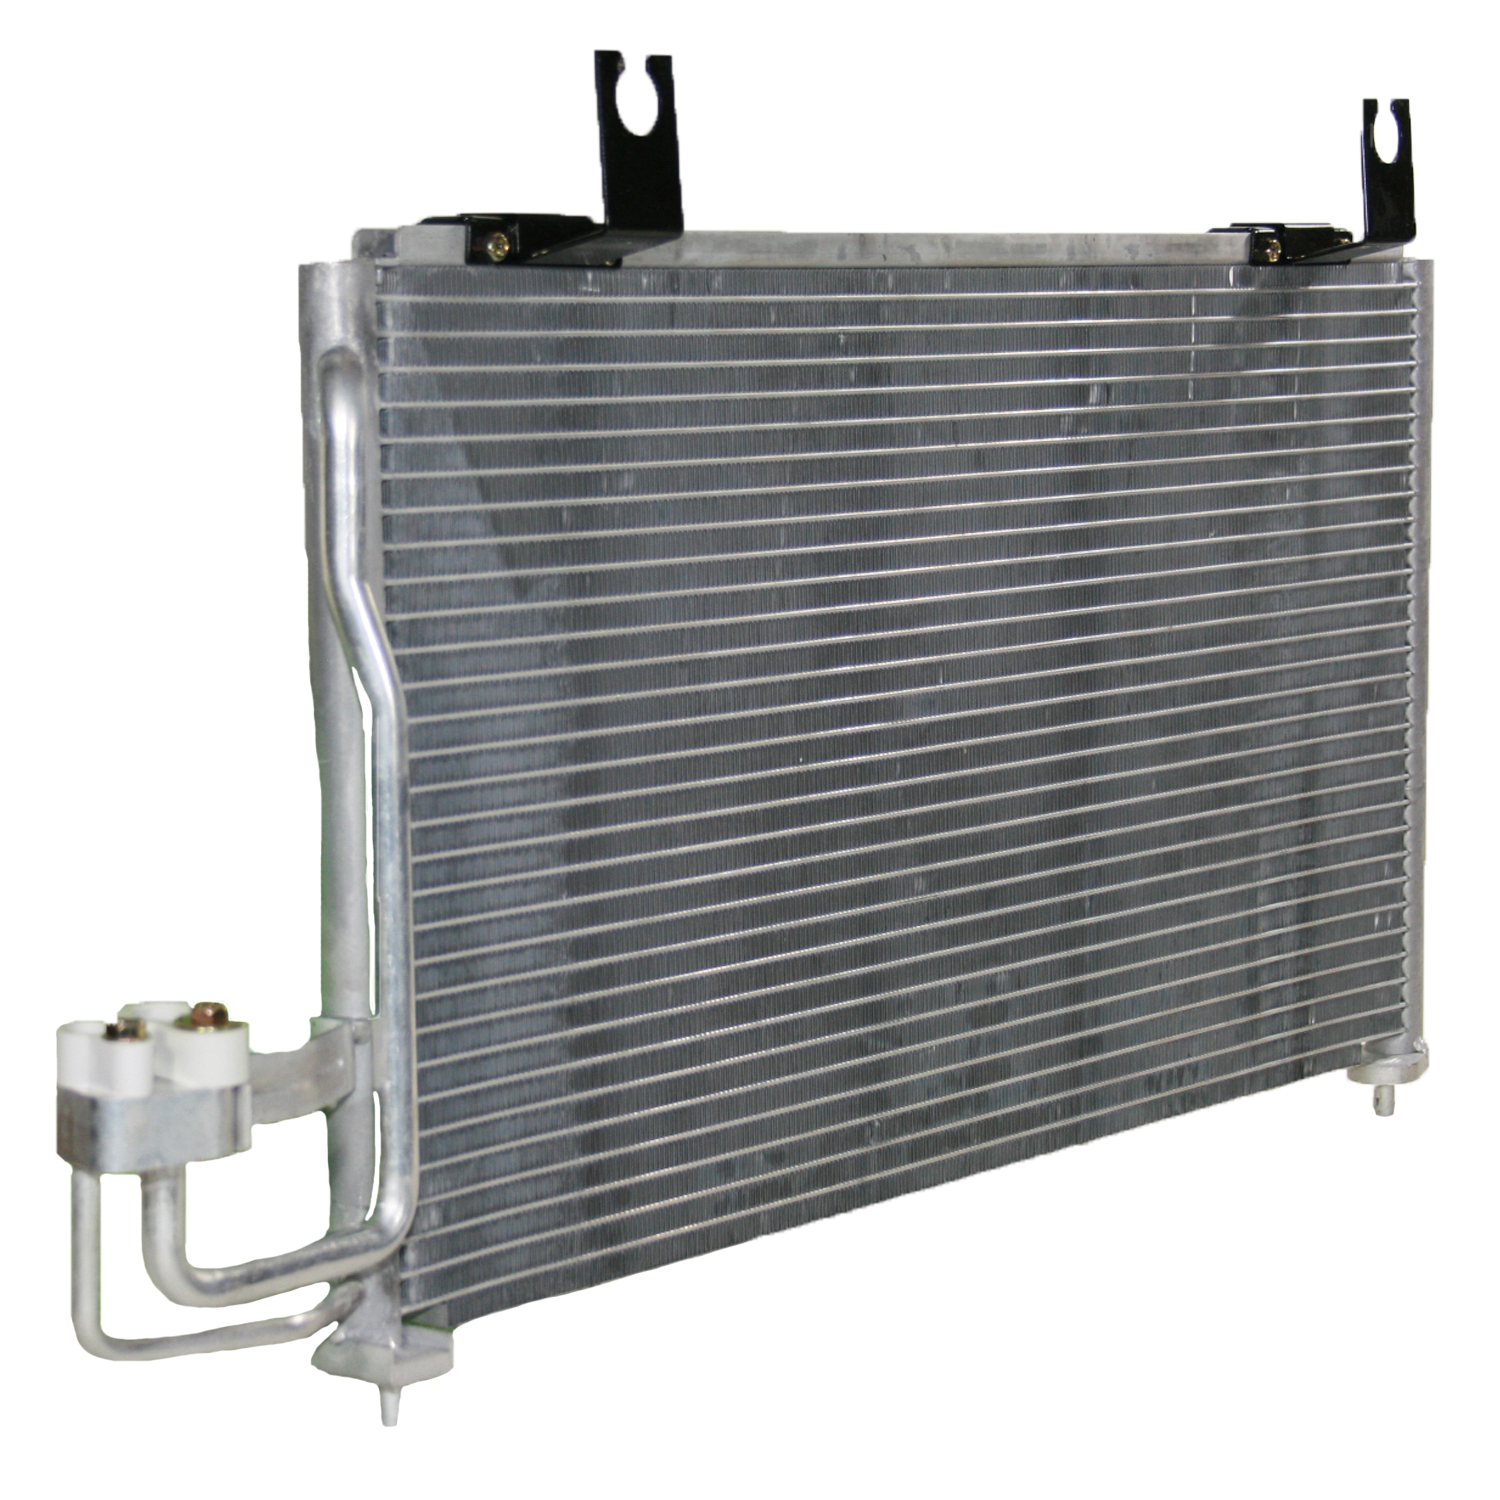 TCW Condenser 44-3067 New Product Image field_60b6a13a6e67c